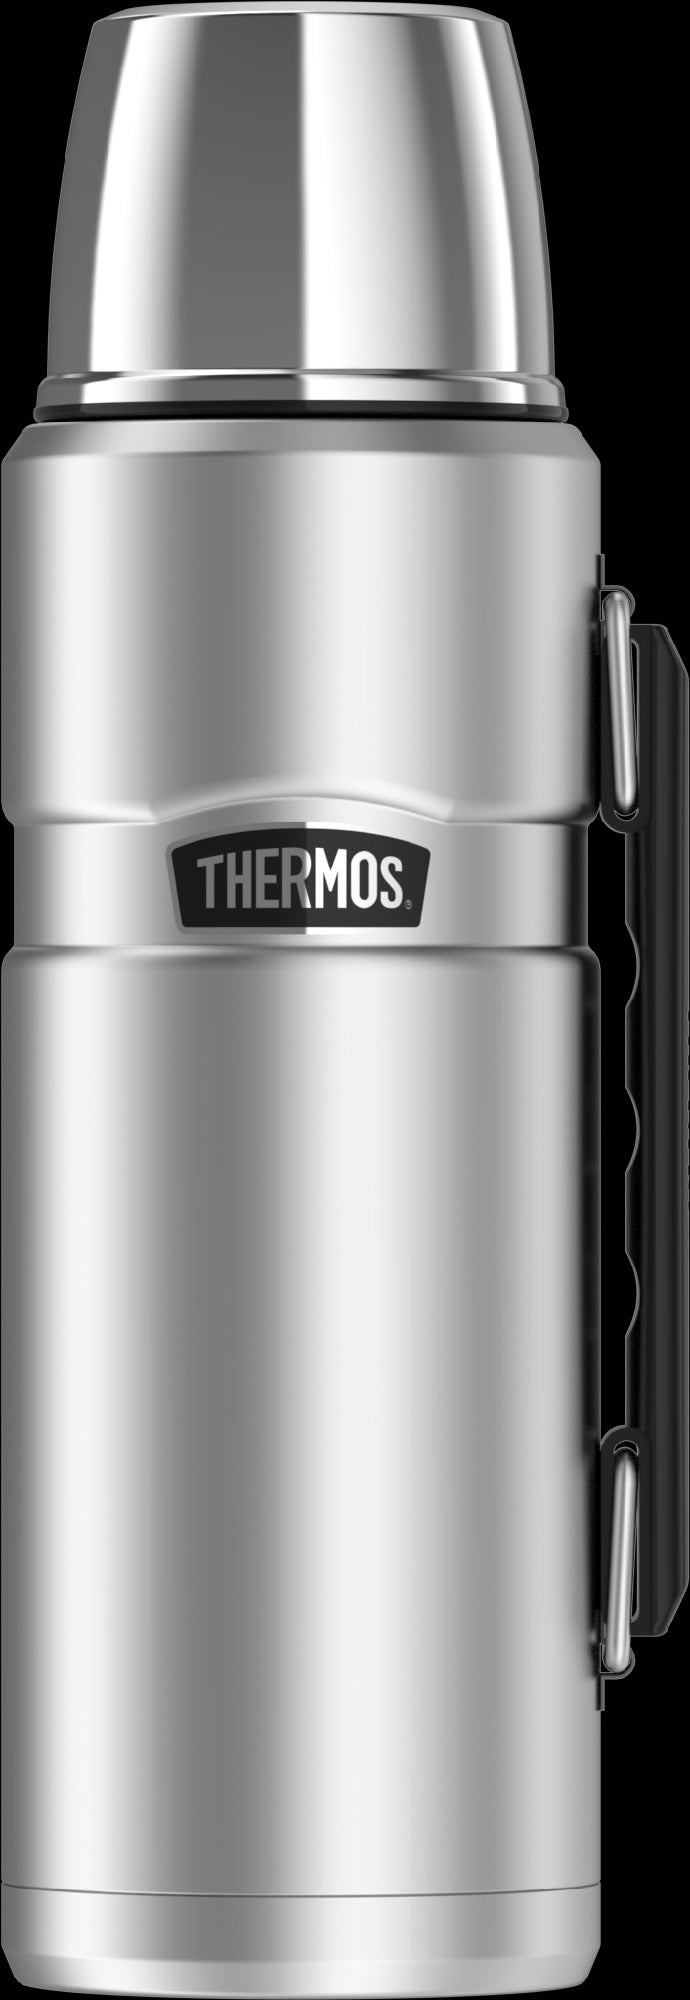 Thermos 1.2l Stainless King Stainless Steel Vacuum Insulated Flask [clr:stainless Steel]